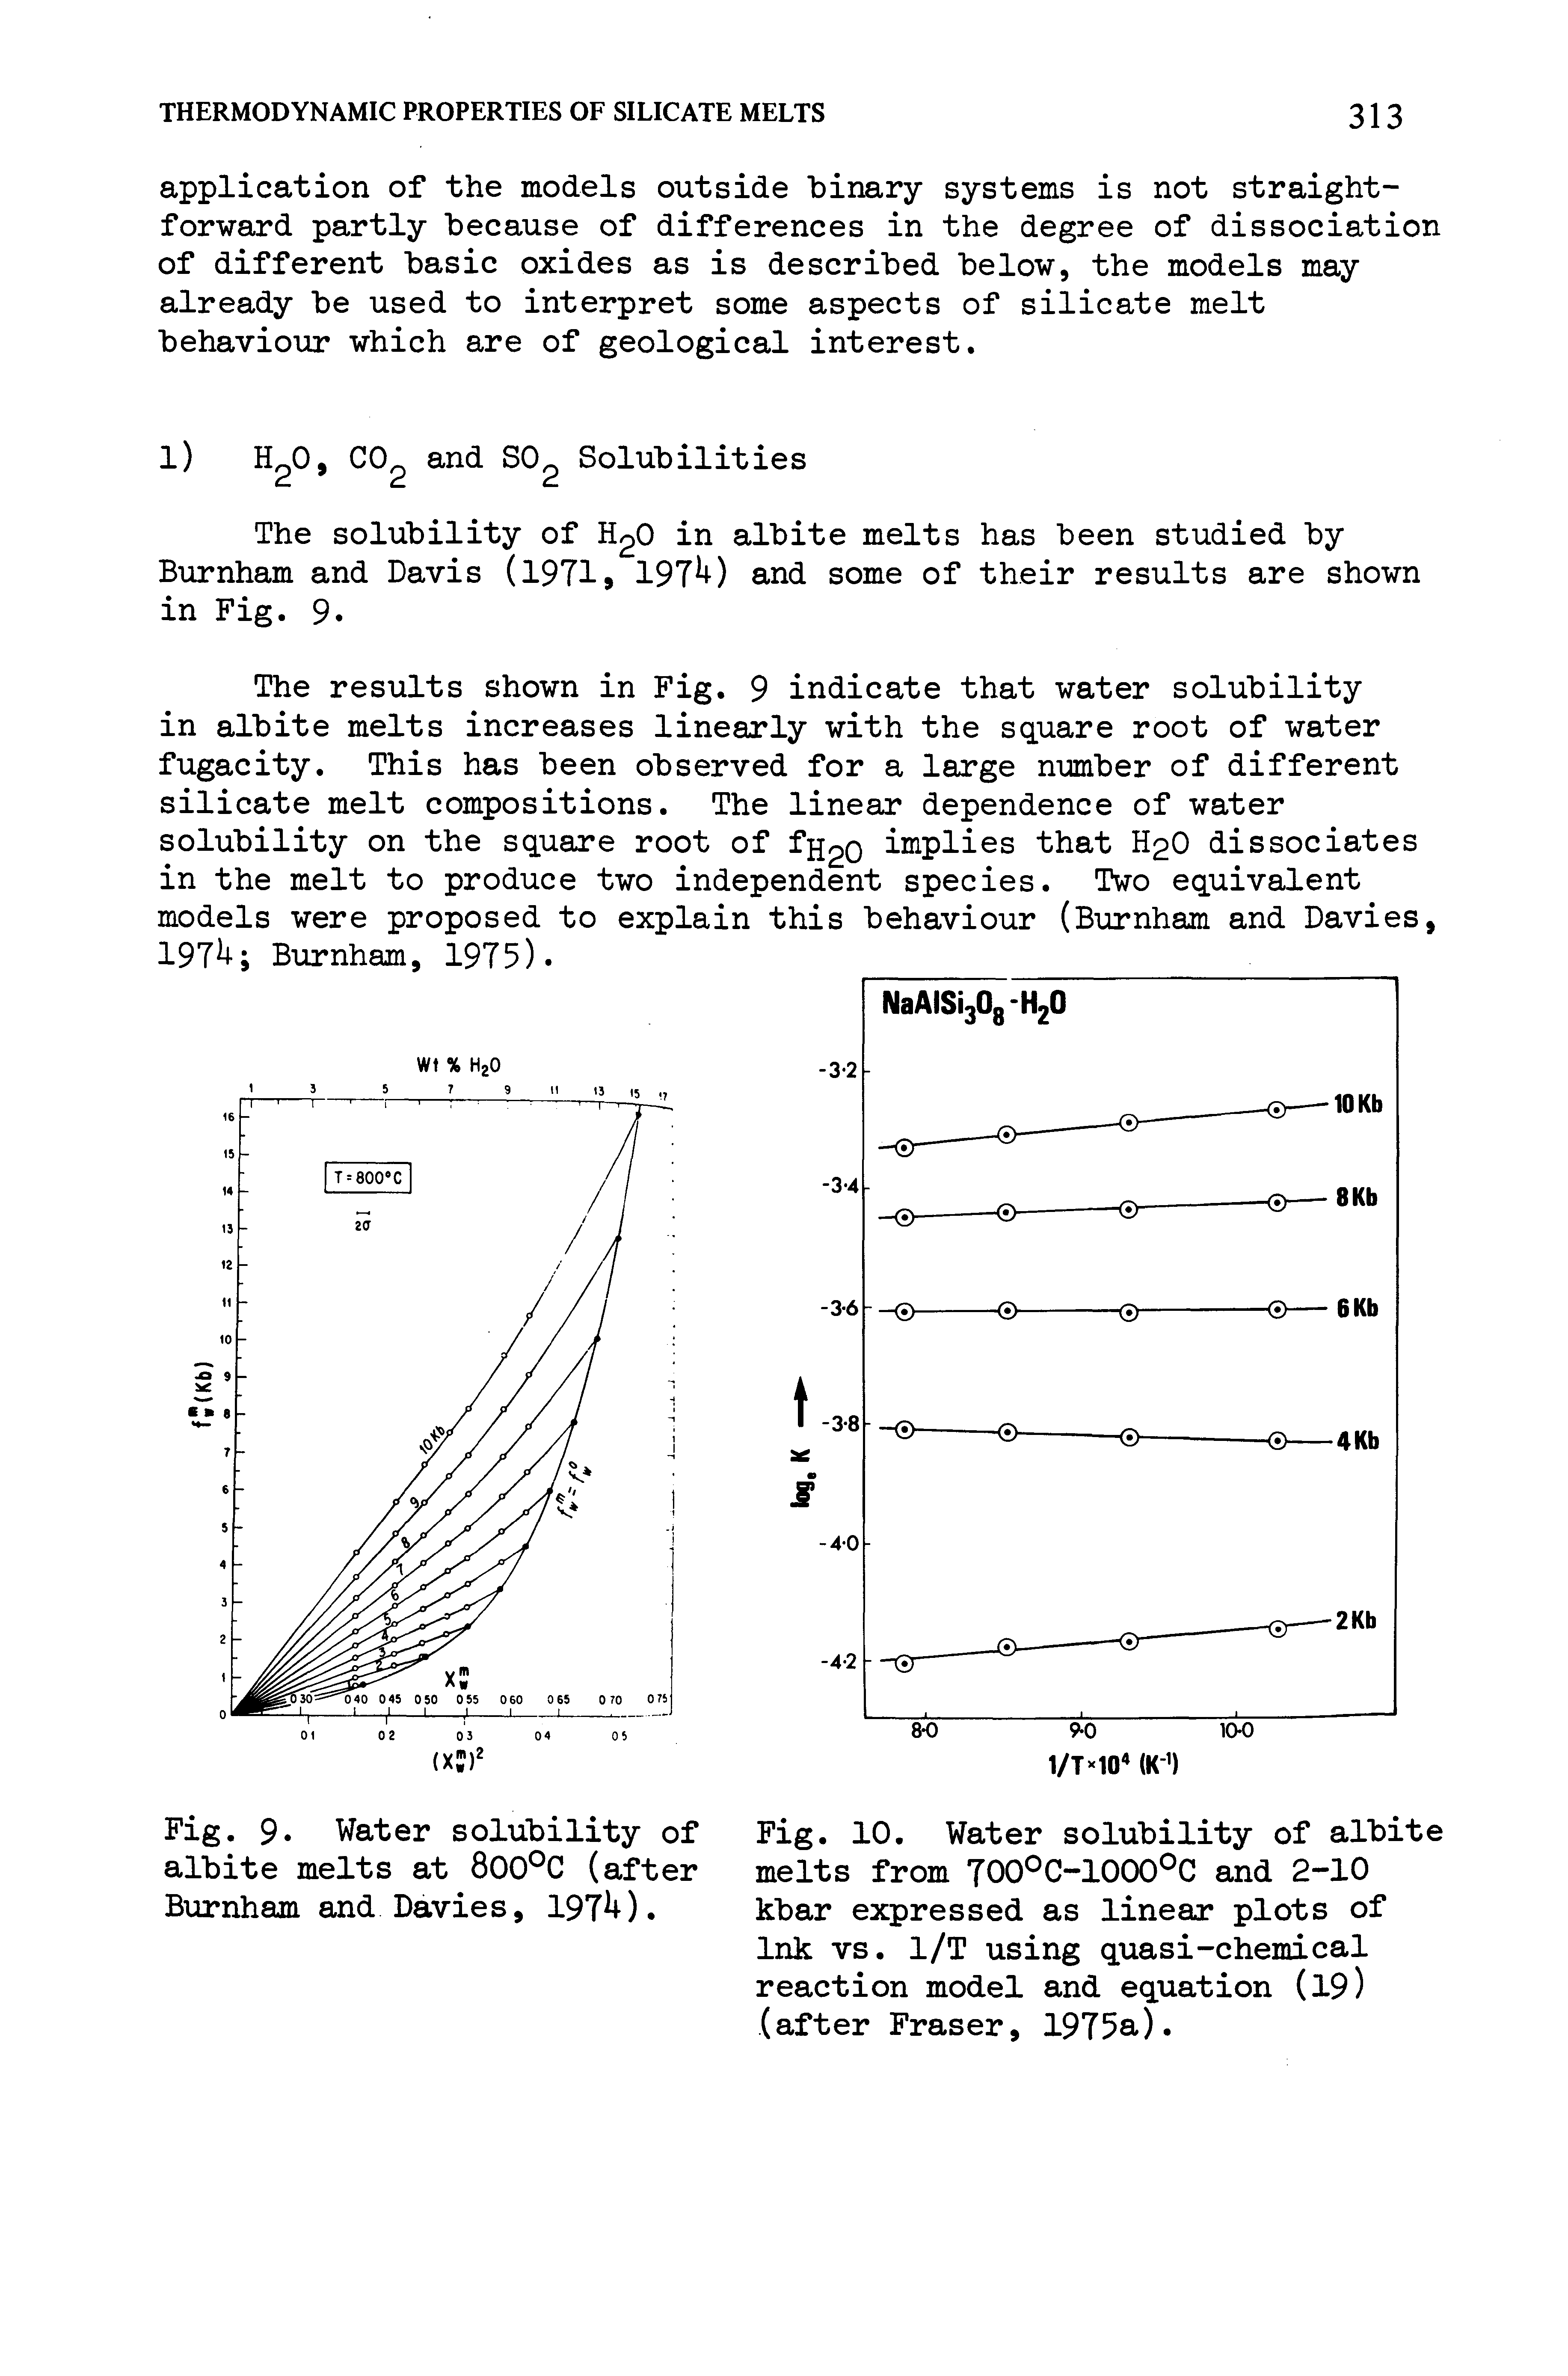 Fig. 10. Water solubility of albite melts from 700OC-1000 C and 2-10 kbar expressed as linear plots of Ink vs. 1/T using quasi-chemical reaction model and equation (19) (after Fraser, 1975a).